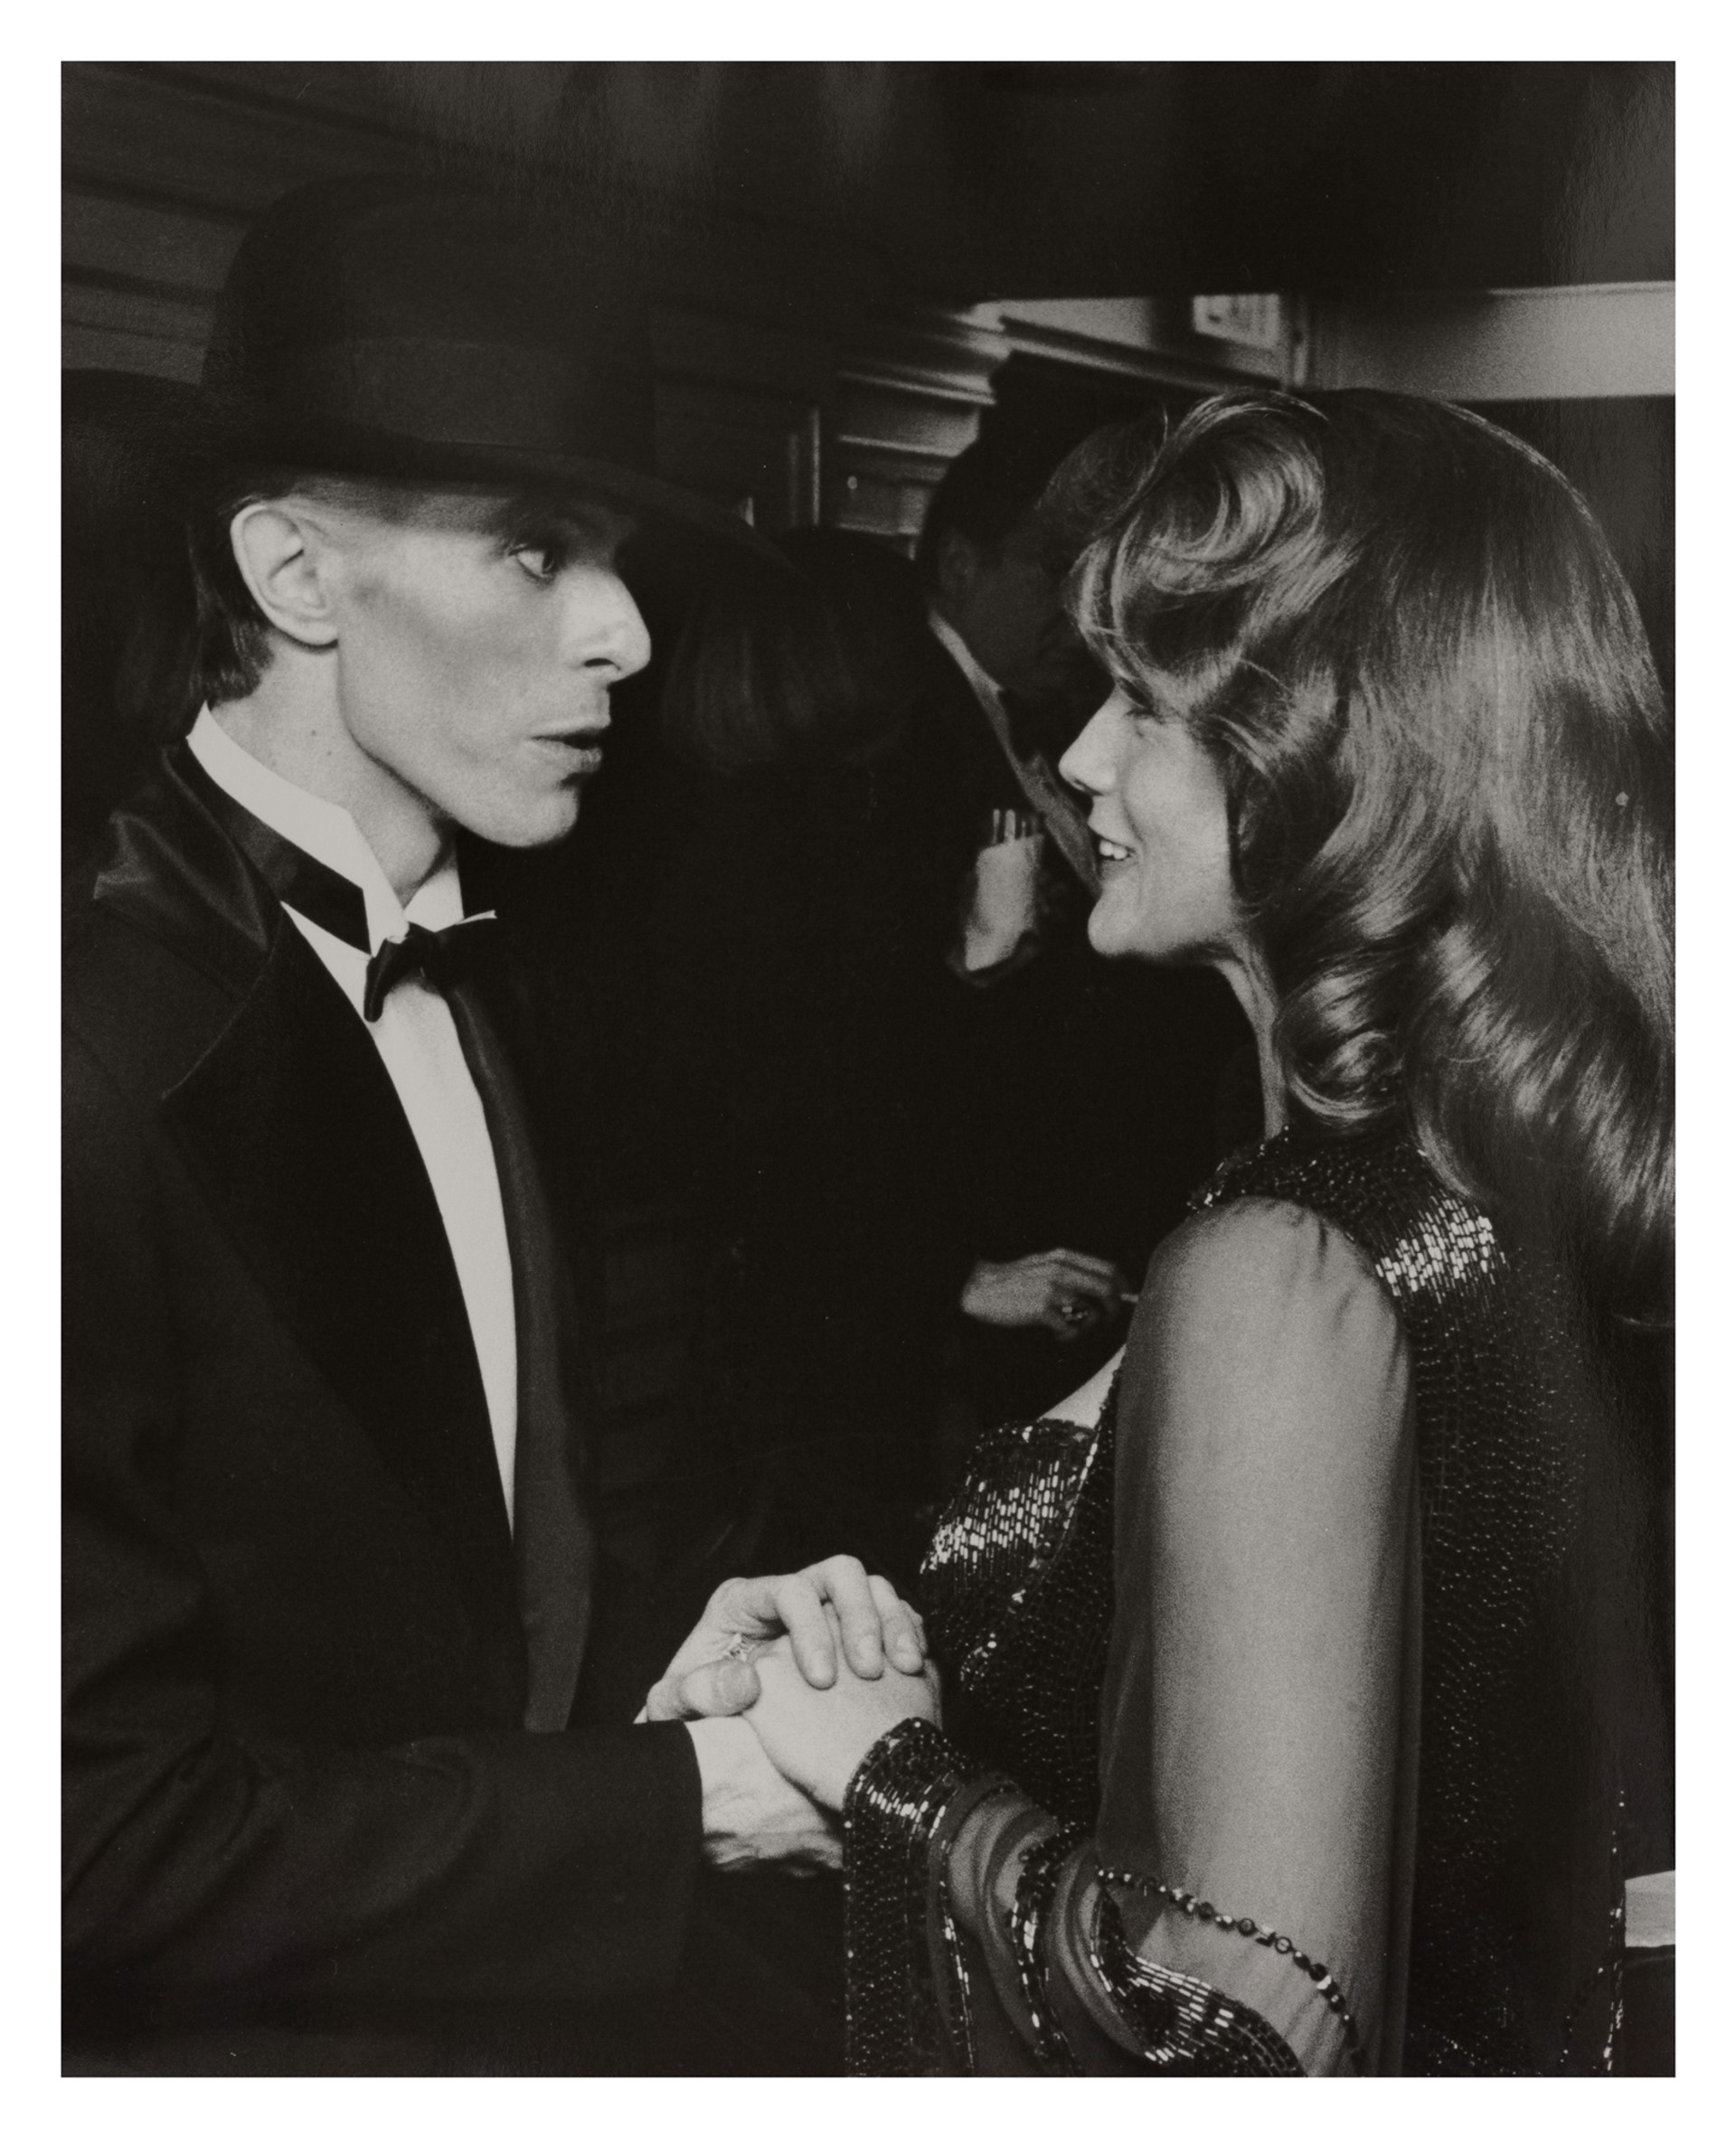 David Bowie and Ann-Margret by Ron Galella